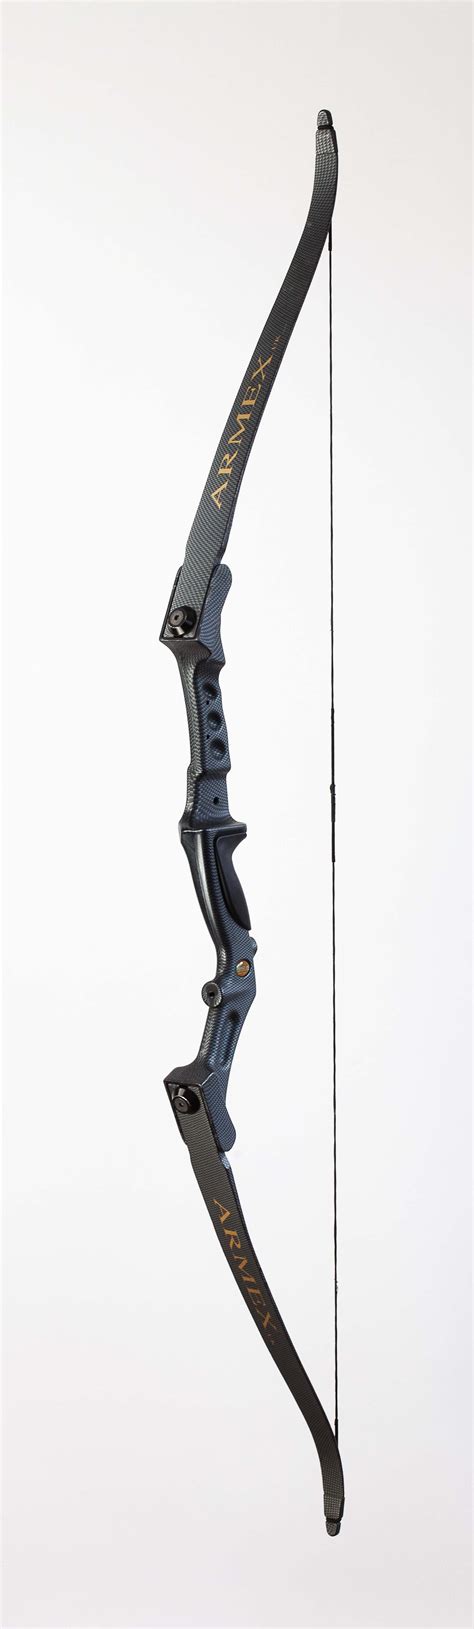 Olympic Recurve Bow 40 Lbs Draw Weight Available From Armex Ltd Archery